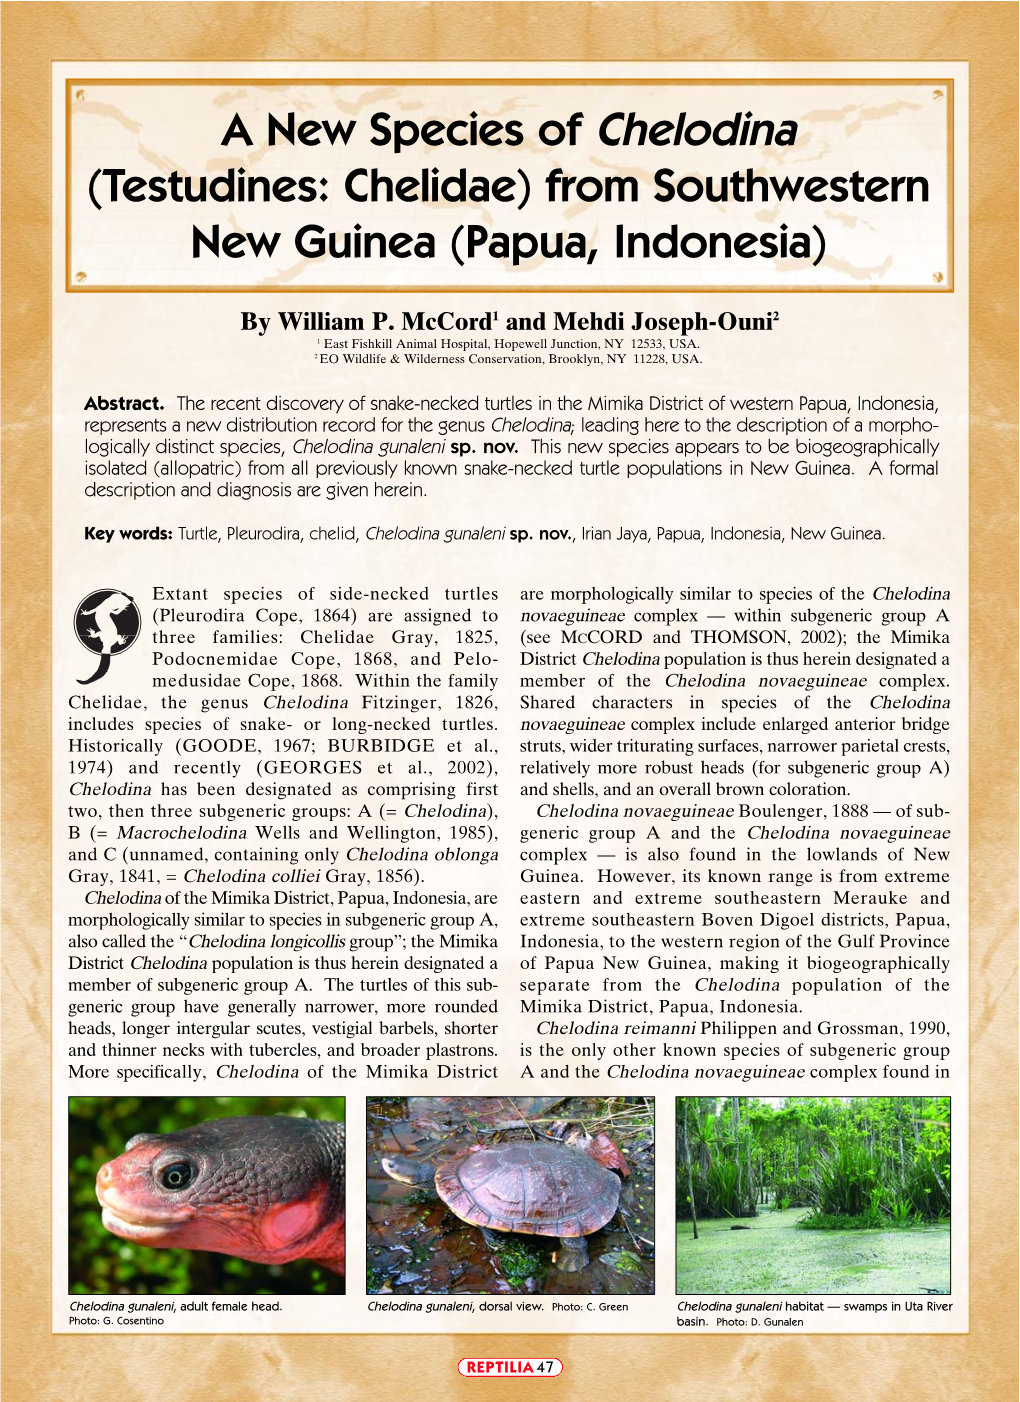 A New Species of Chelodina (Testudines: Chelidae) from Southwestern New Guinea (Papua, Indonesia)